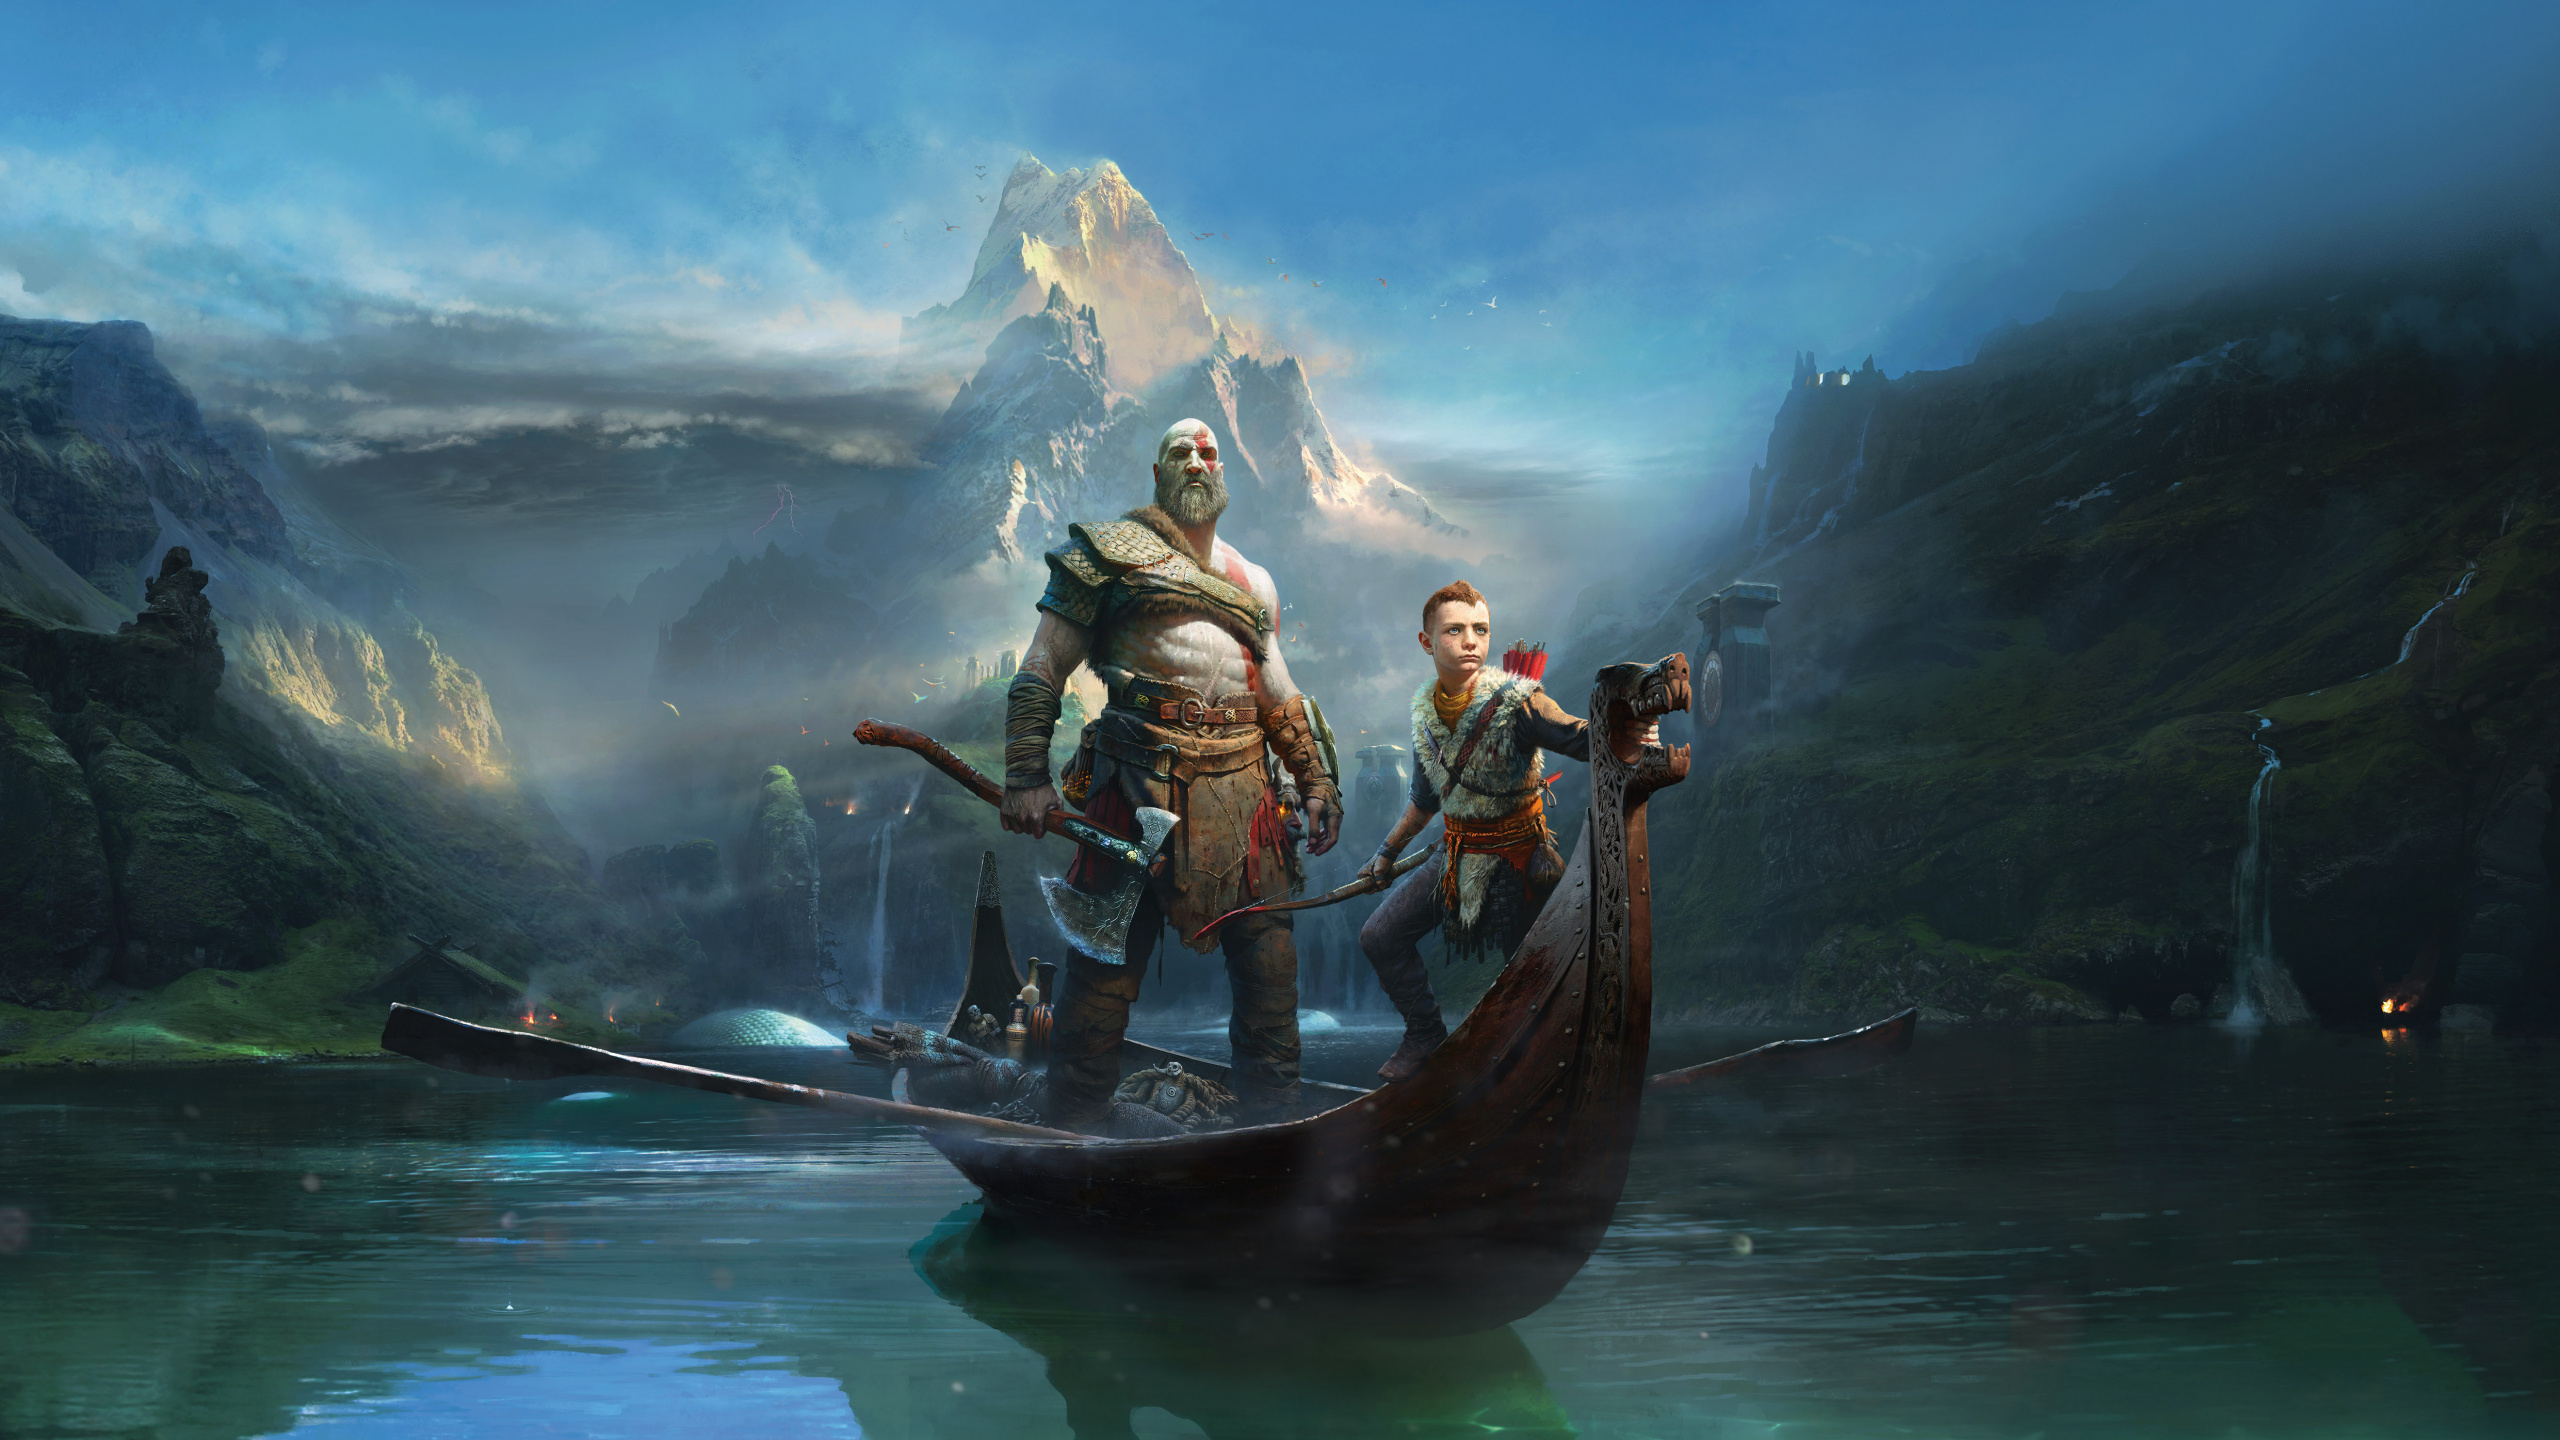 God of War, Kratos, Playstation 4, Adventure Game, pc Game. Wallpaper in 2560x1440 Resolution